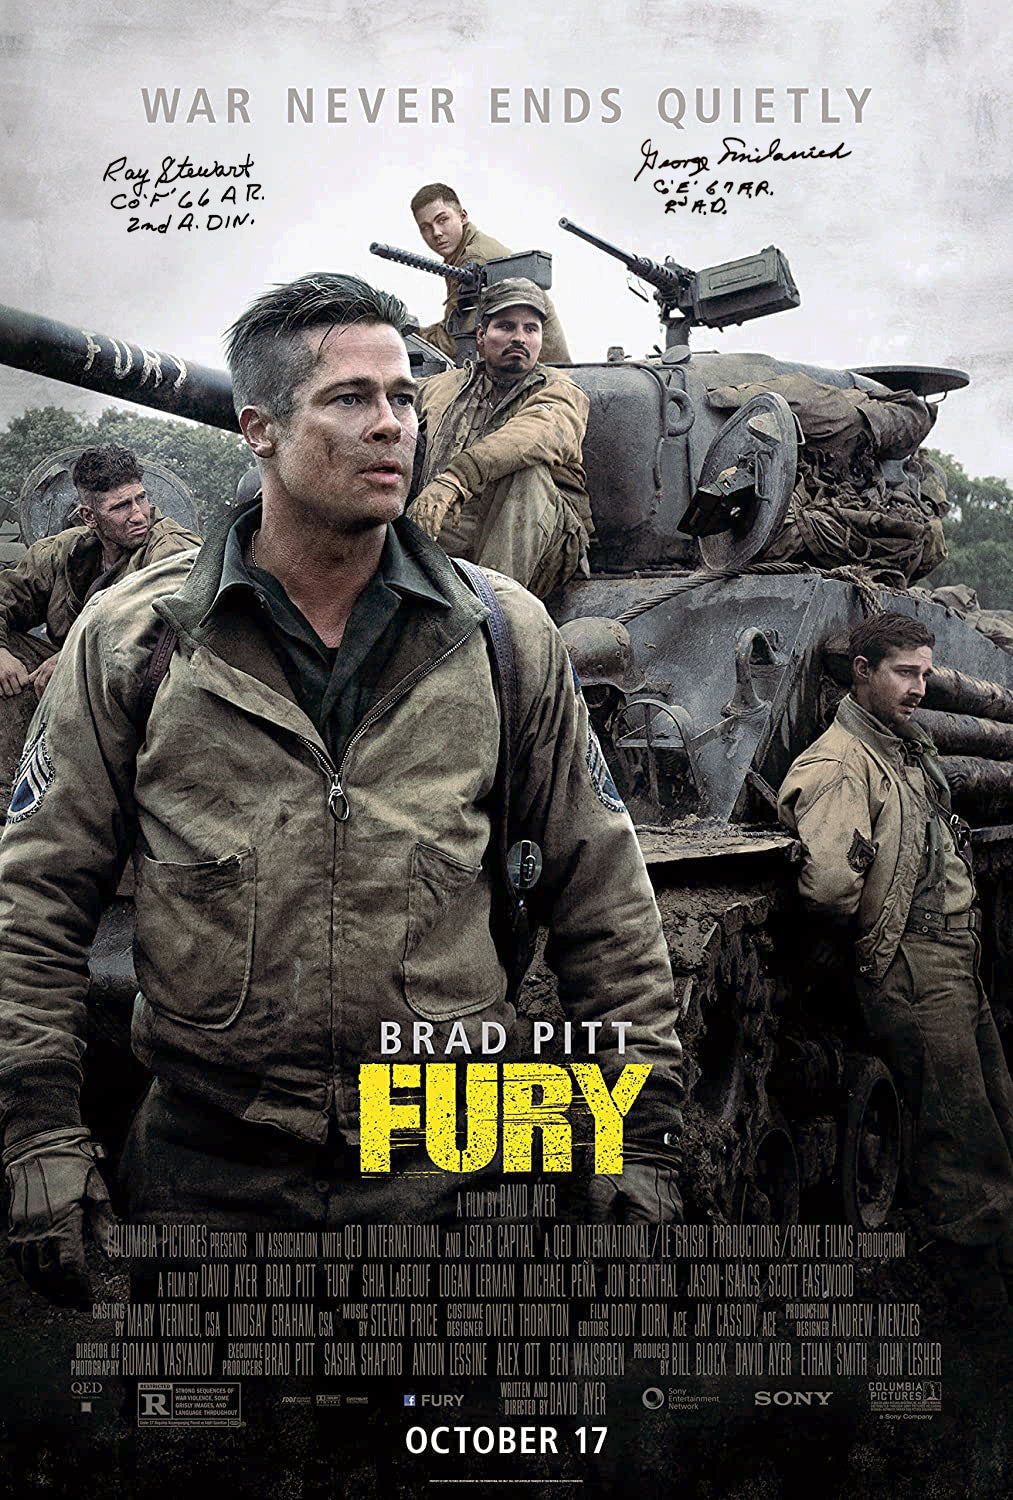 Autographed "FURY" Poster A